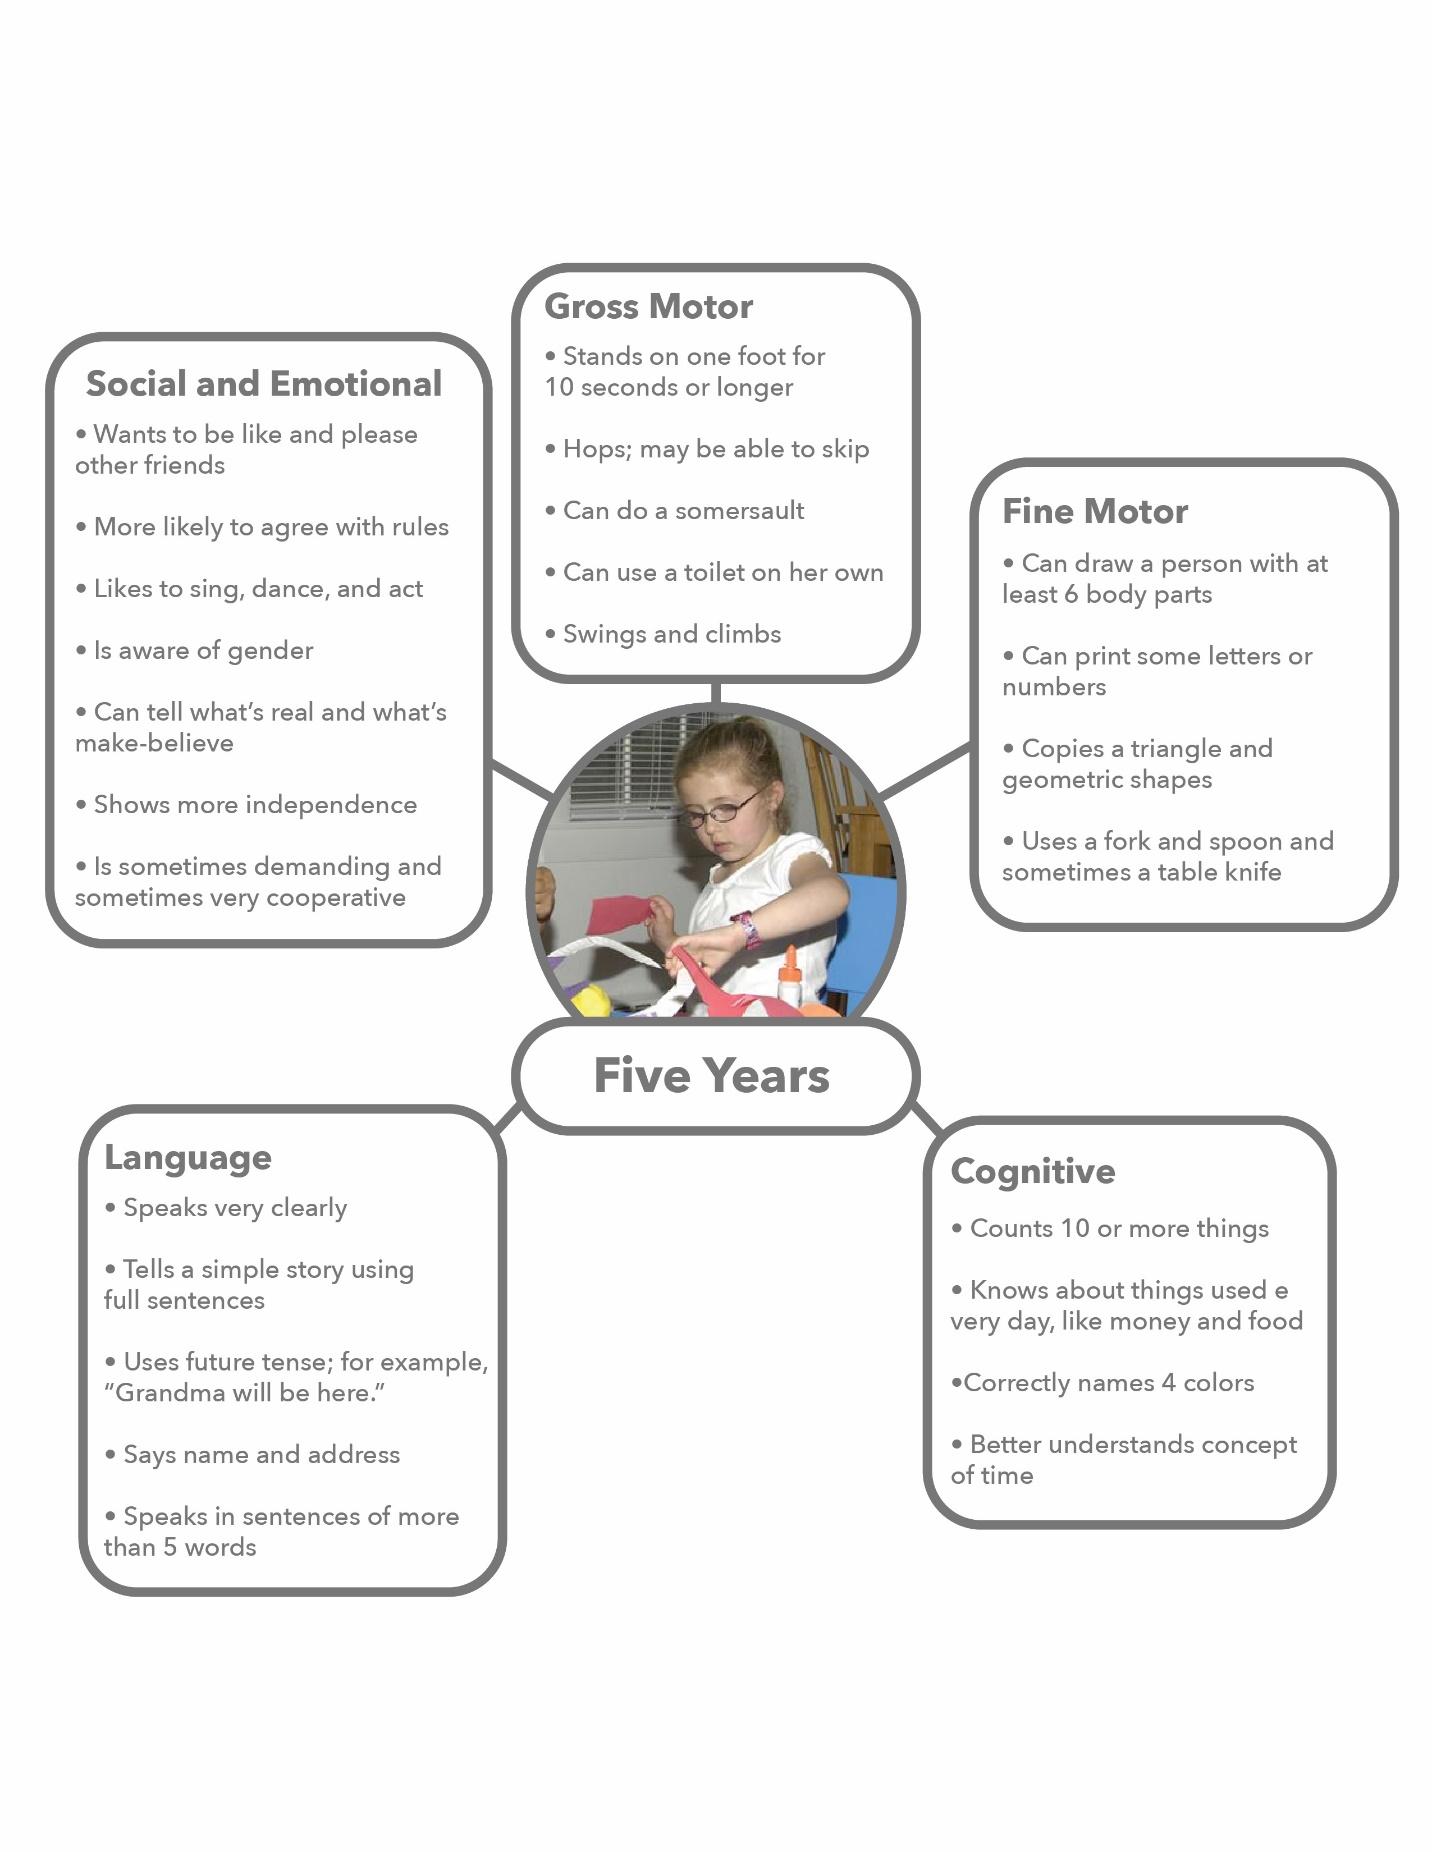 A graphic showing the develomental milestones of a five-year-old